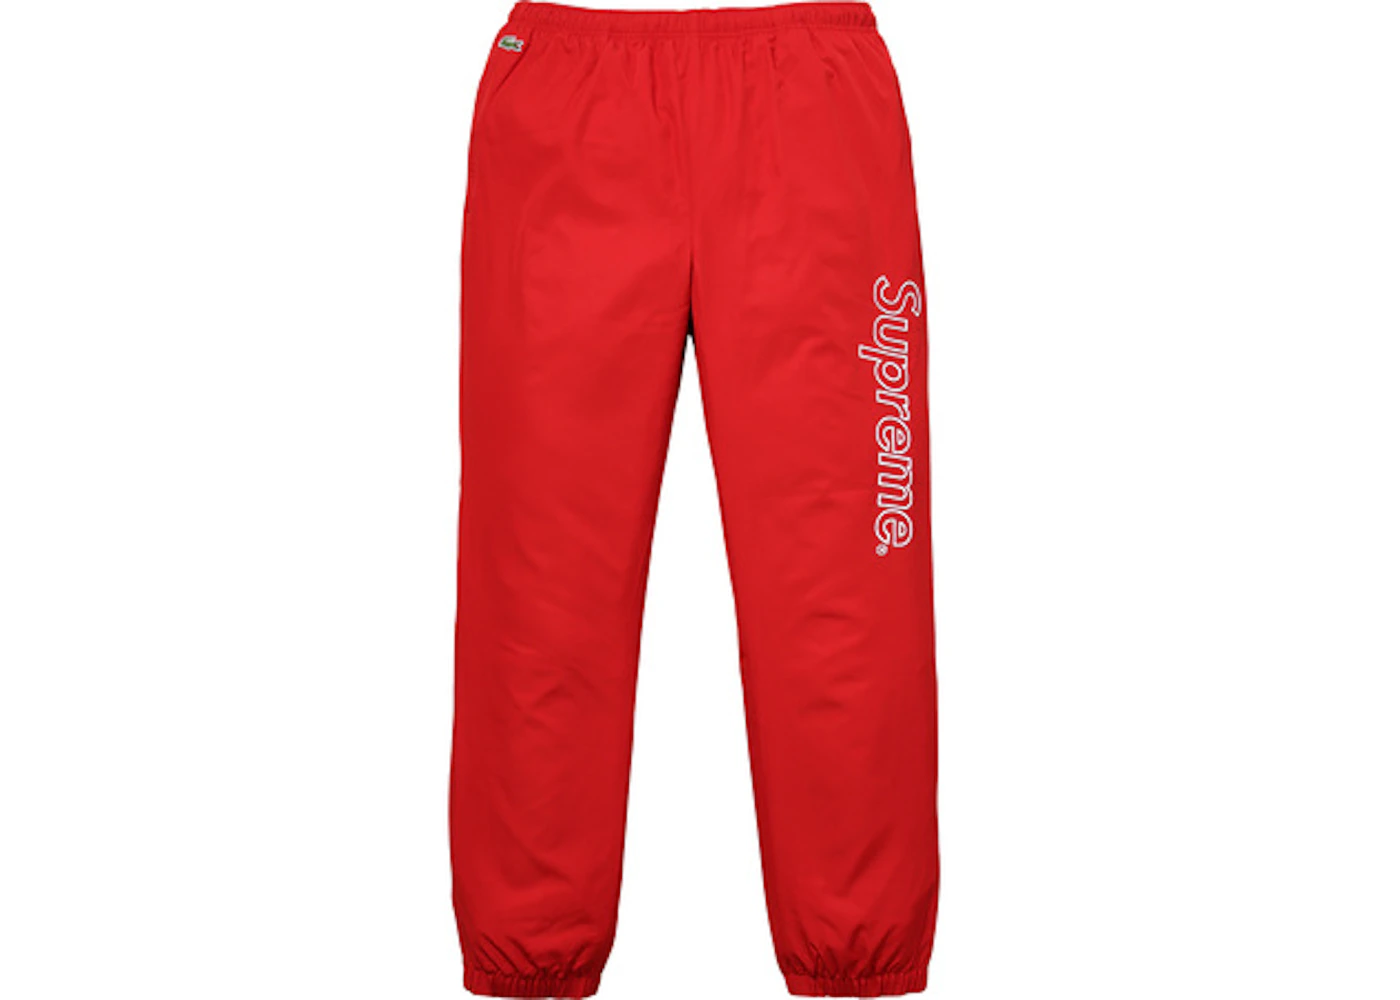 Supreme Lacoste Track Pant Red Men's - SS17 - US